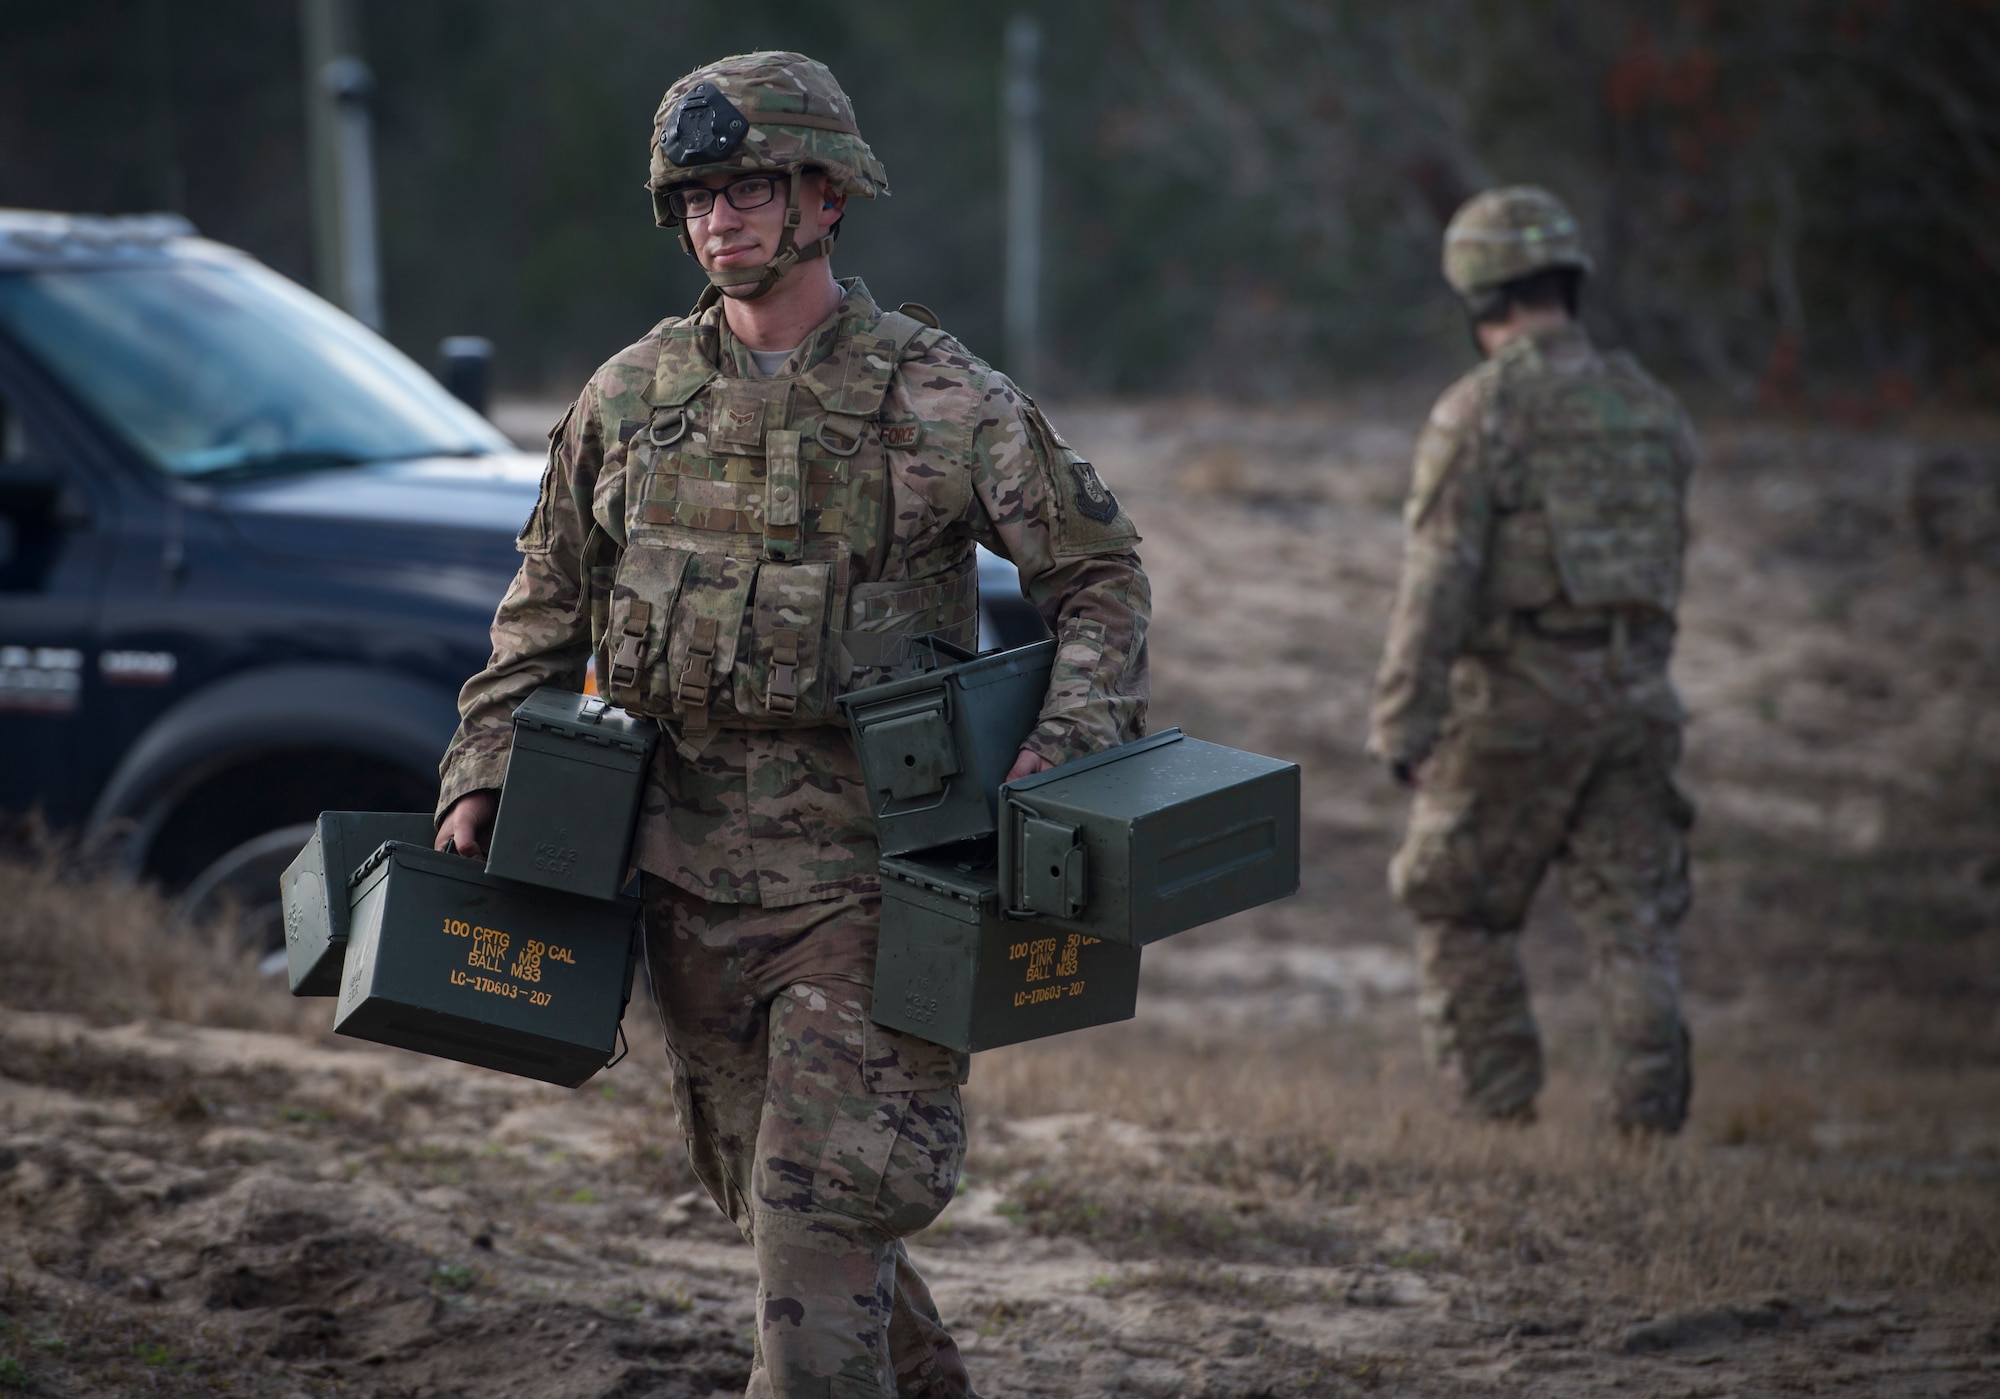 An Airman from the 824th Base Defense Squadron carries empty ammunition boxes during Weapons Week, Jan. 23, 2018, at Camp Blanding Joint Training Center, Fla. During Weapons Week, Airmen qualify on heavy weapons to include the M2 machine gun, Mark 19 40mm grenade machine gun, M240B machine gun, M249 light machine gun, M136E1 AT4-CS confined space light anti-armor weapon, and M18 Claymore mine. (U.S. Air Force photo by Senior Airman Janiqua P. Robinson)